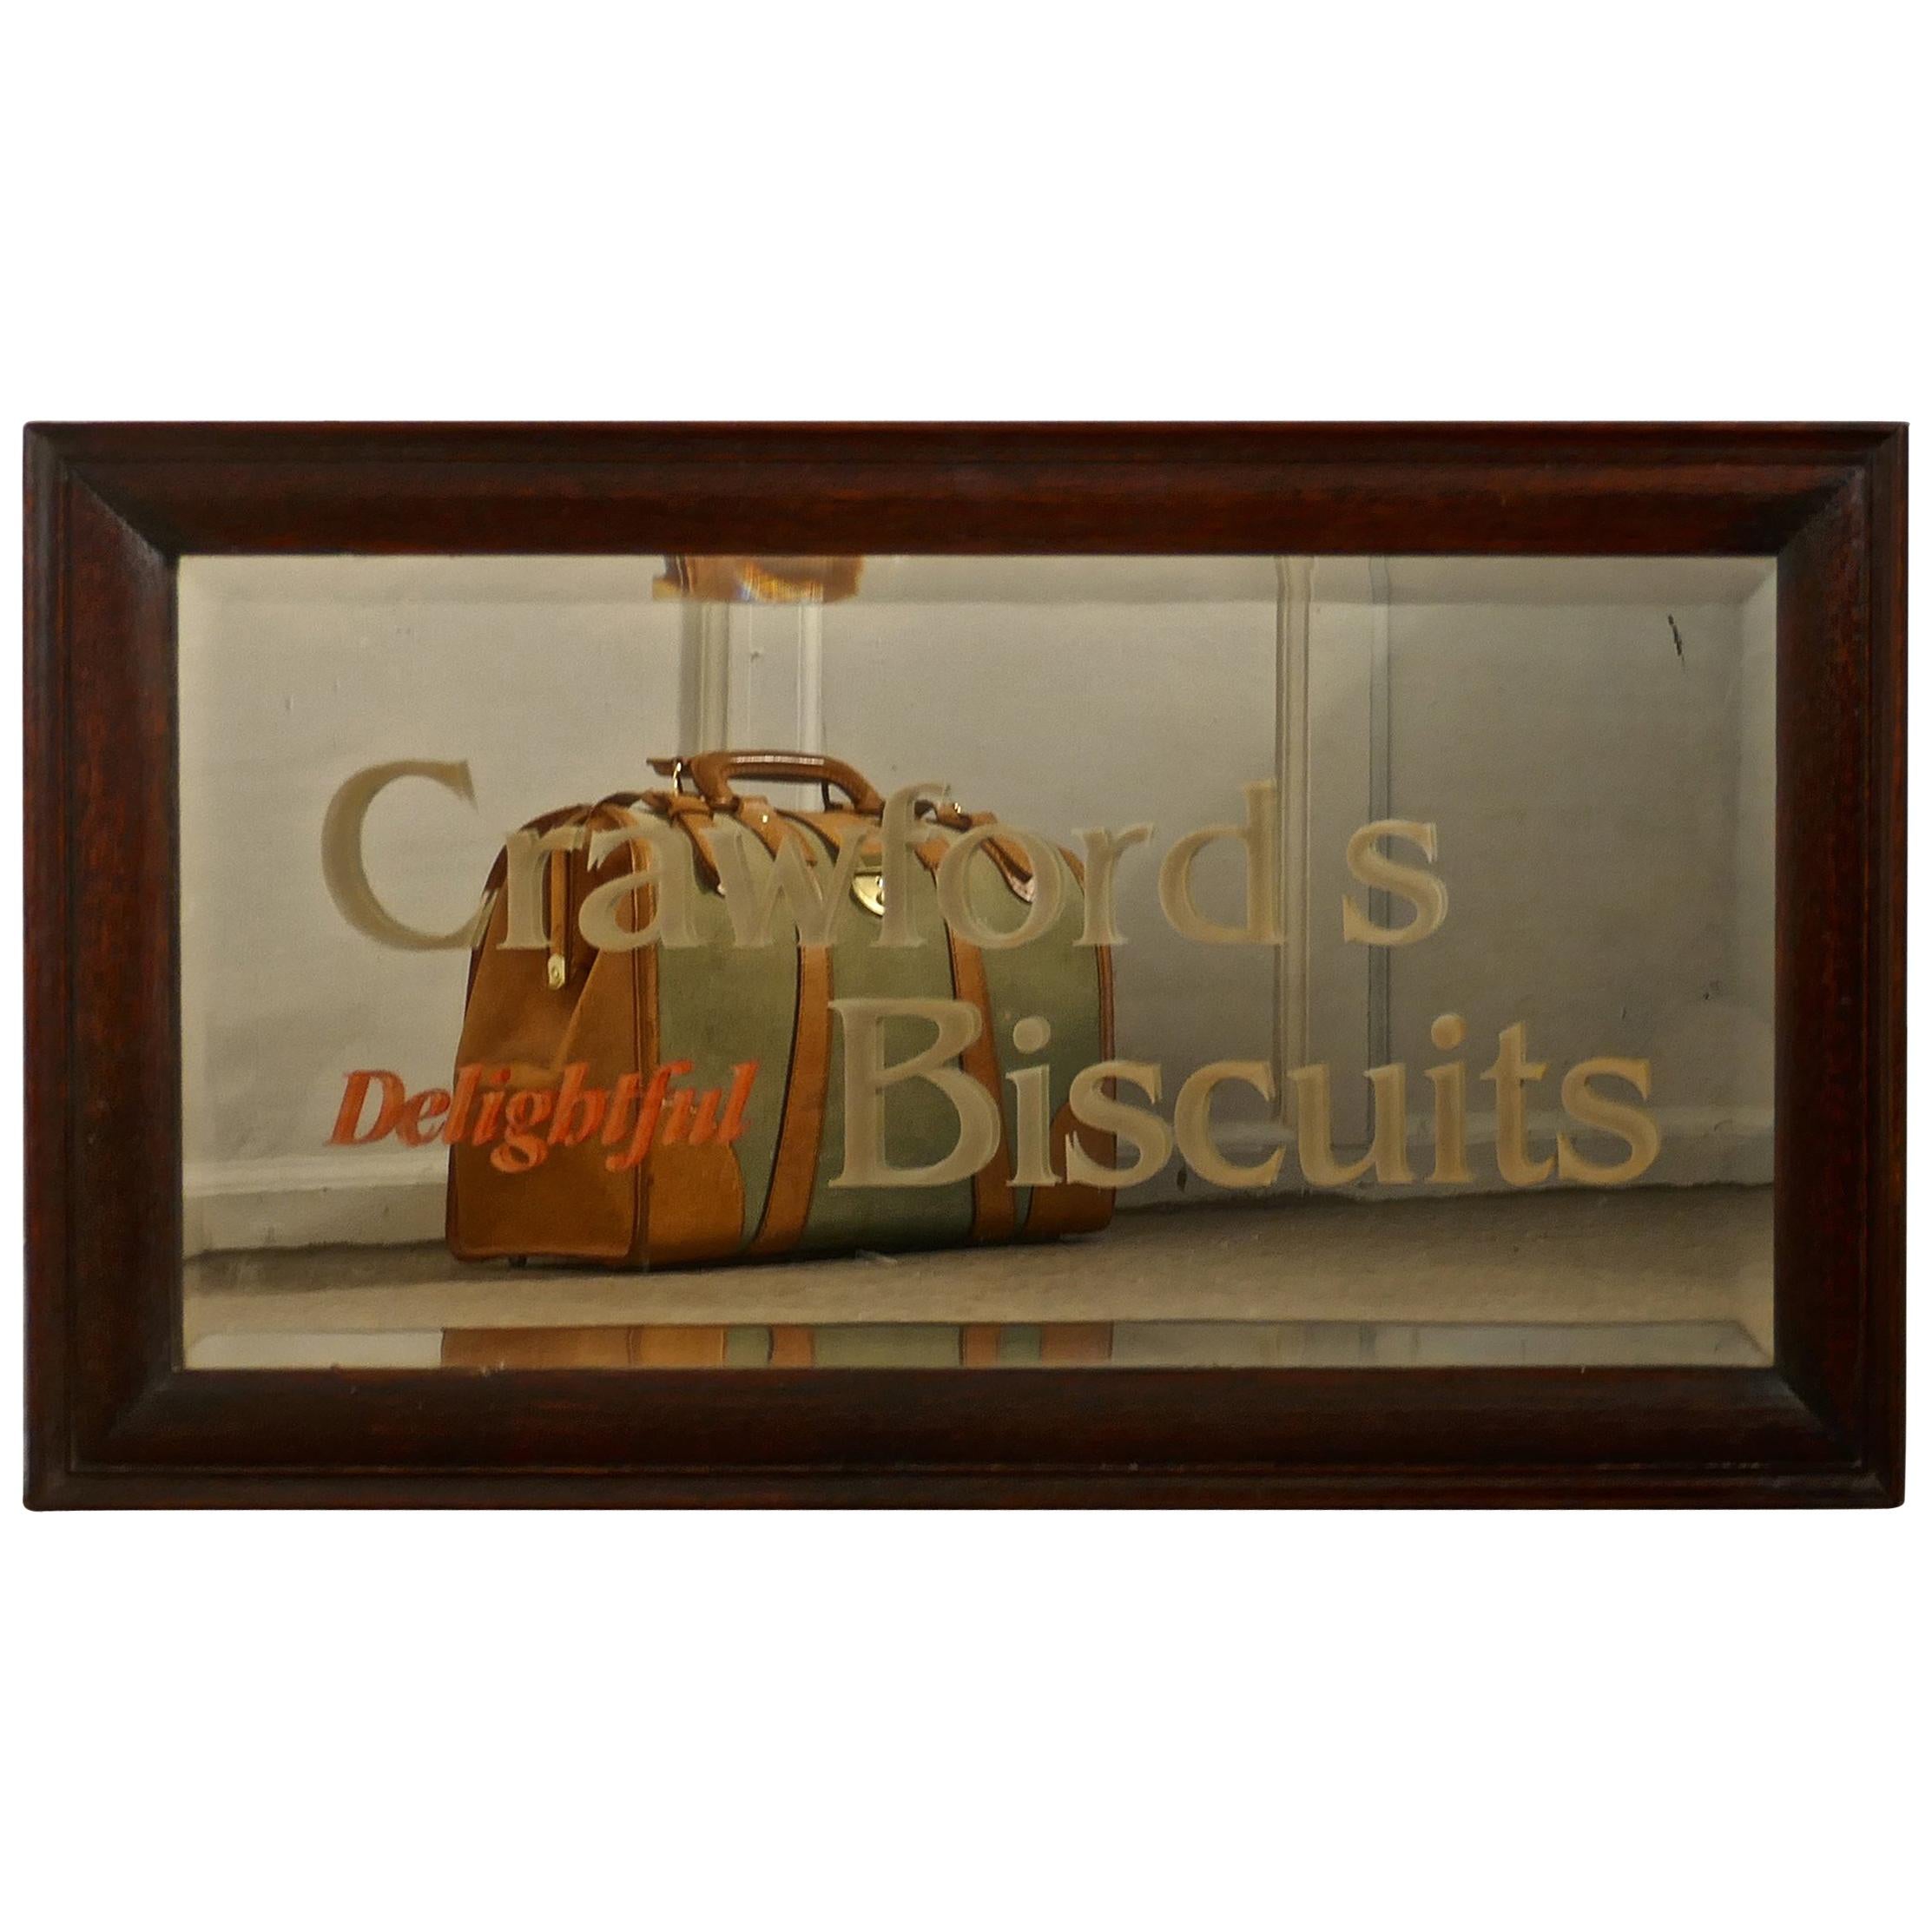 Advertising Mirror “Crawford’s Delightful Biscuits” Baker or Cafe 